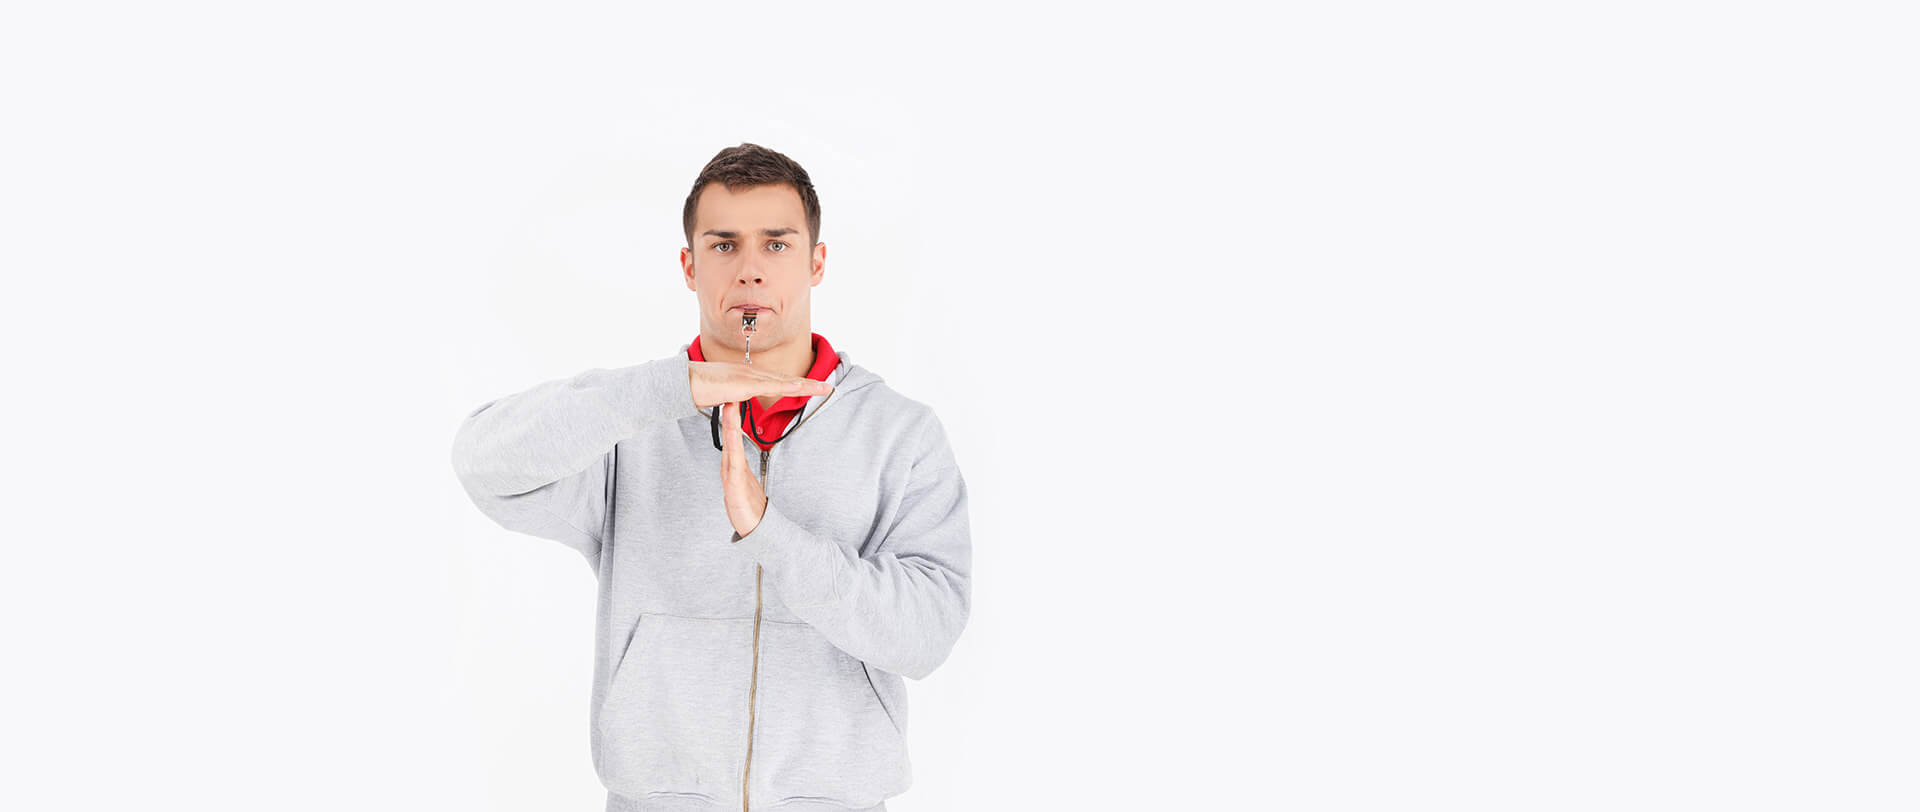 A health coach, blowing a whistle and making the “time-out” gesture